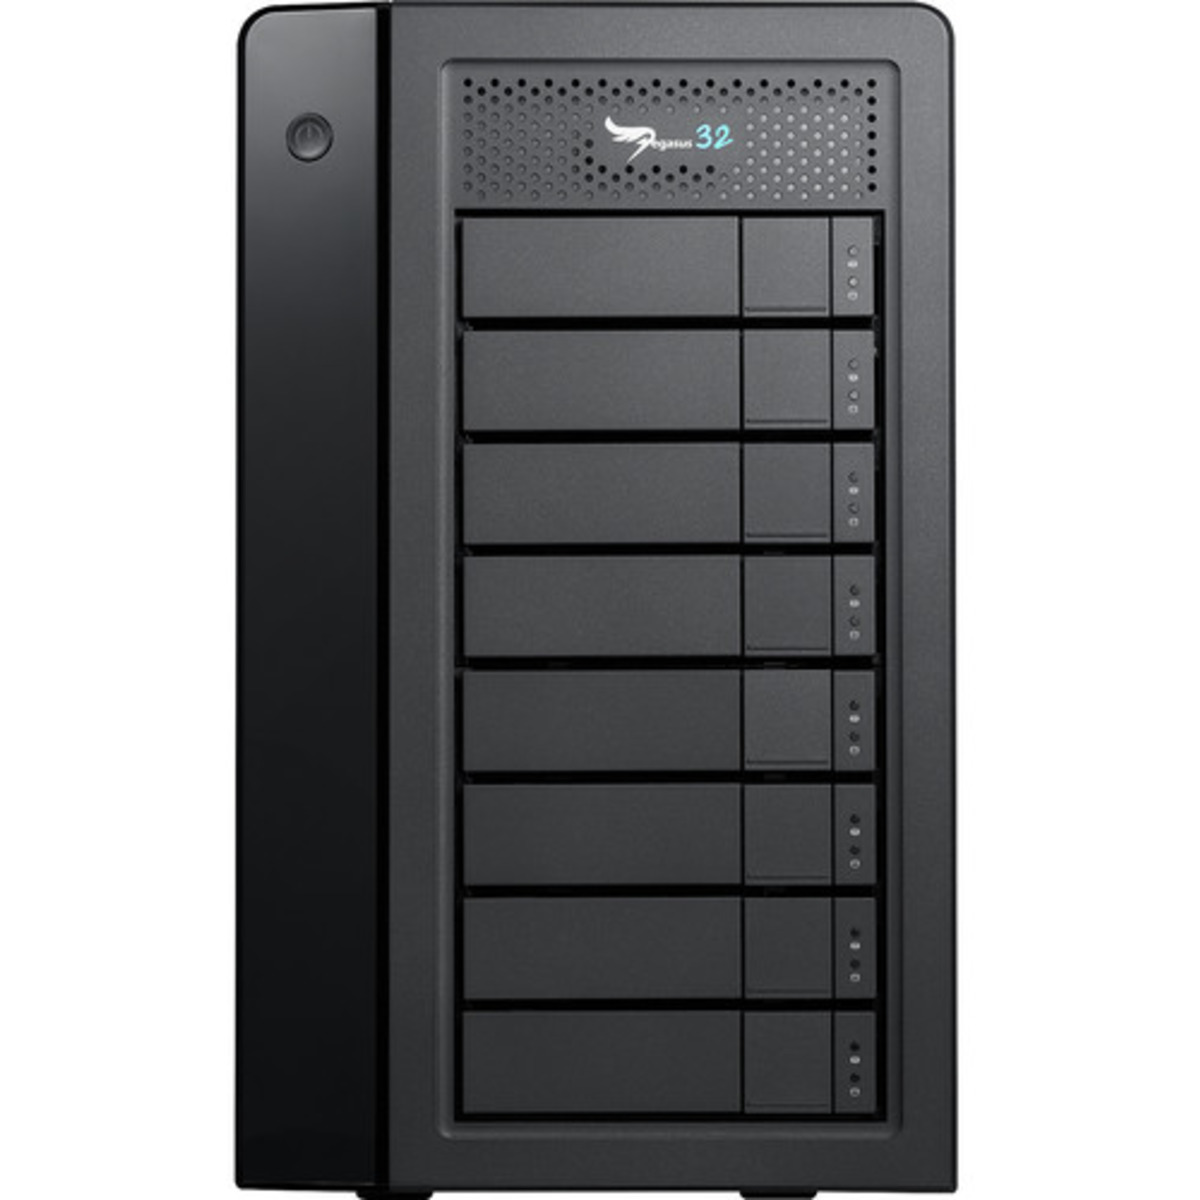 Promise Technology Pegasus32 R8 Thunderbolt 3 100tb 8-Bay Desktop Multimedia / Power User / Business DAS - Direct Attached Storage Device 5x20tb Toshiba Enterprise Capacity MG10ACA20TE 3.5 7200rpm SATA 6Gb/s HDD ENTERPRISE Class Drives Installed - Burn-In Tested - ON SALE Pegasus32 R8 Thunderbolt 3